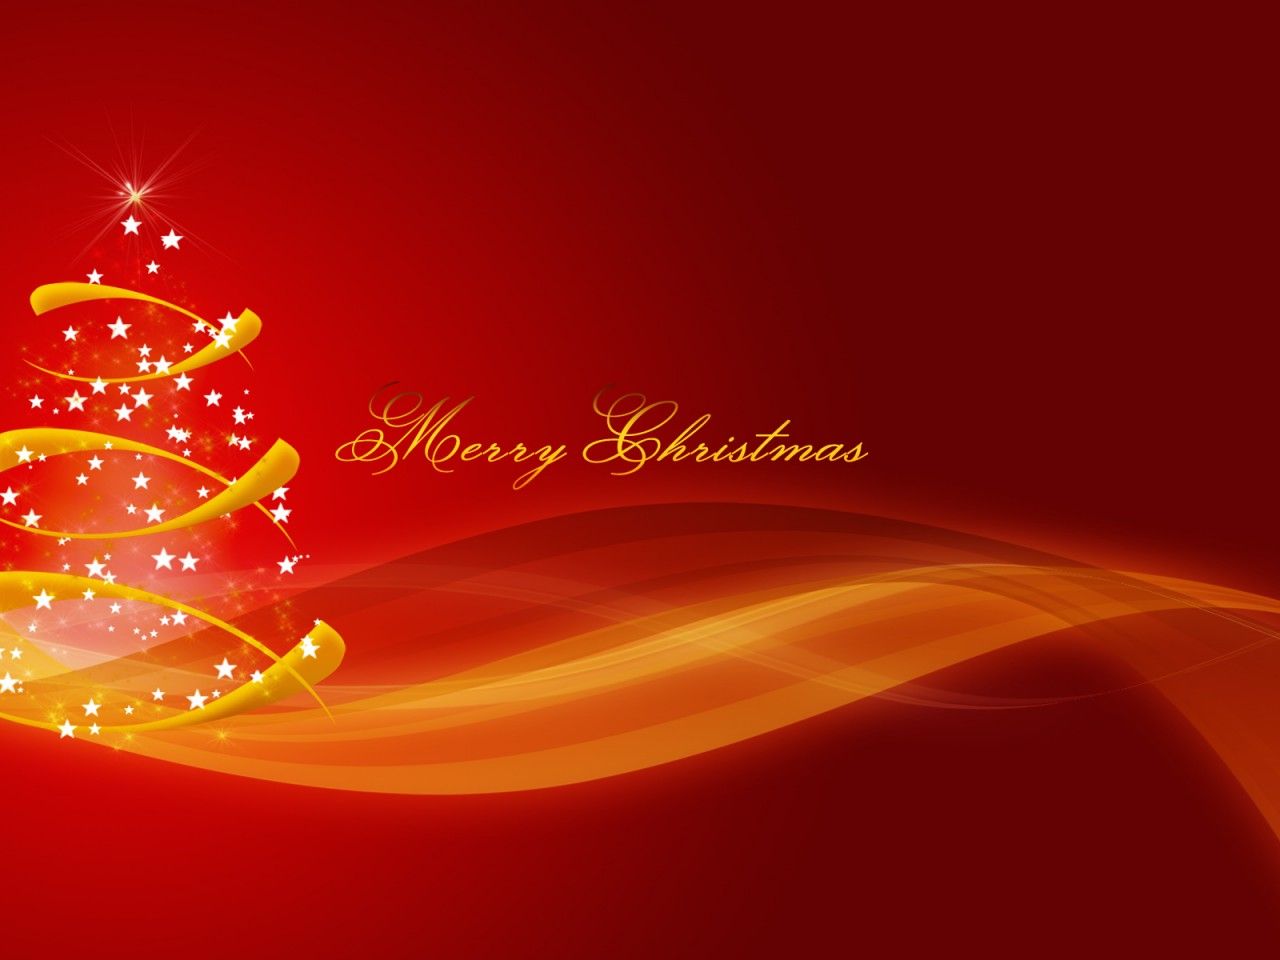 Simple Merry Christmas Wallpaper - HD Backgrounds